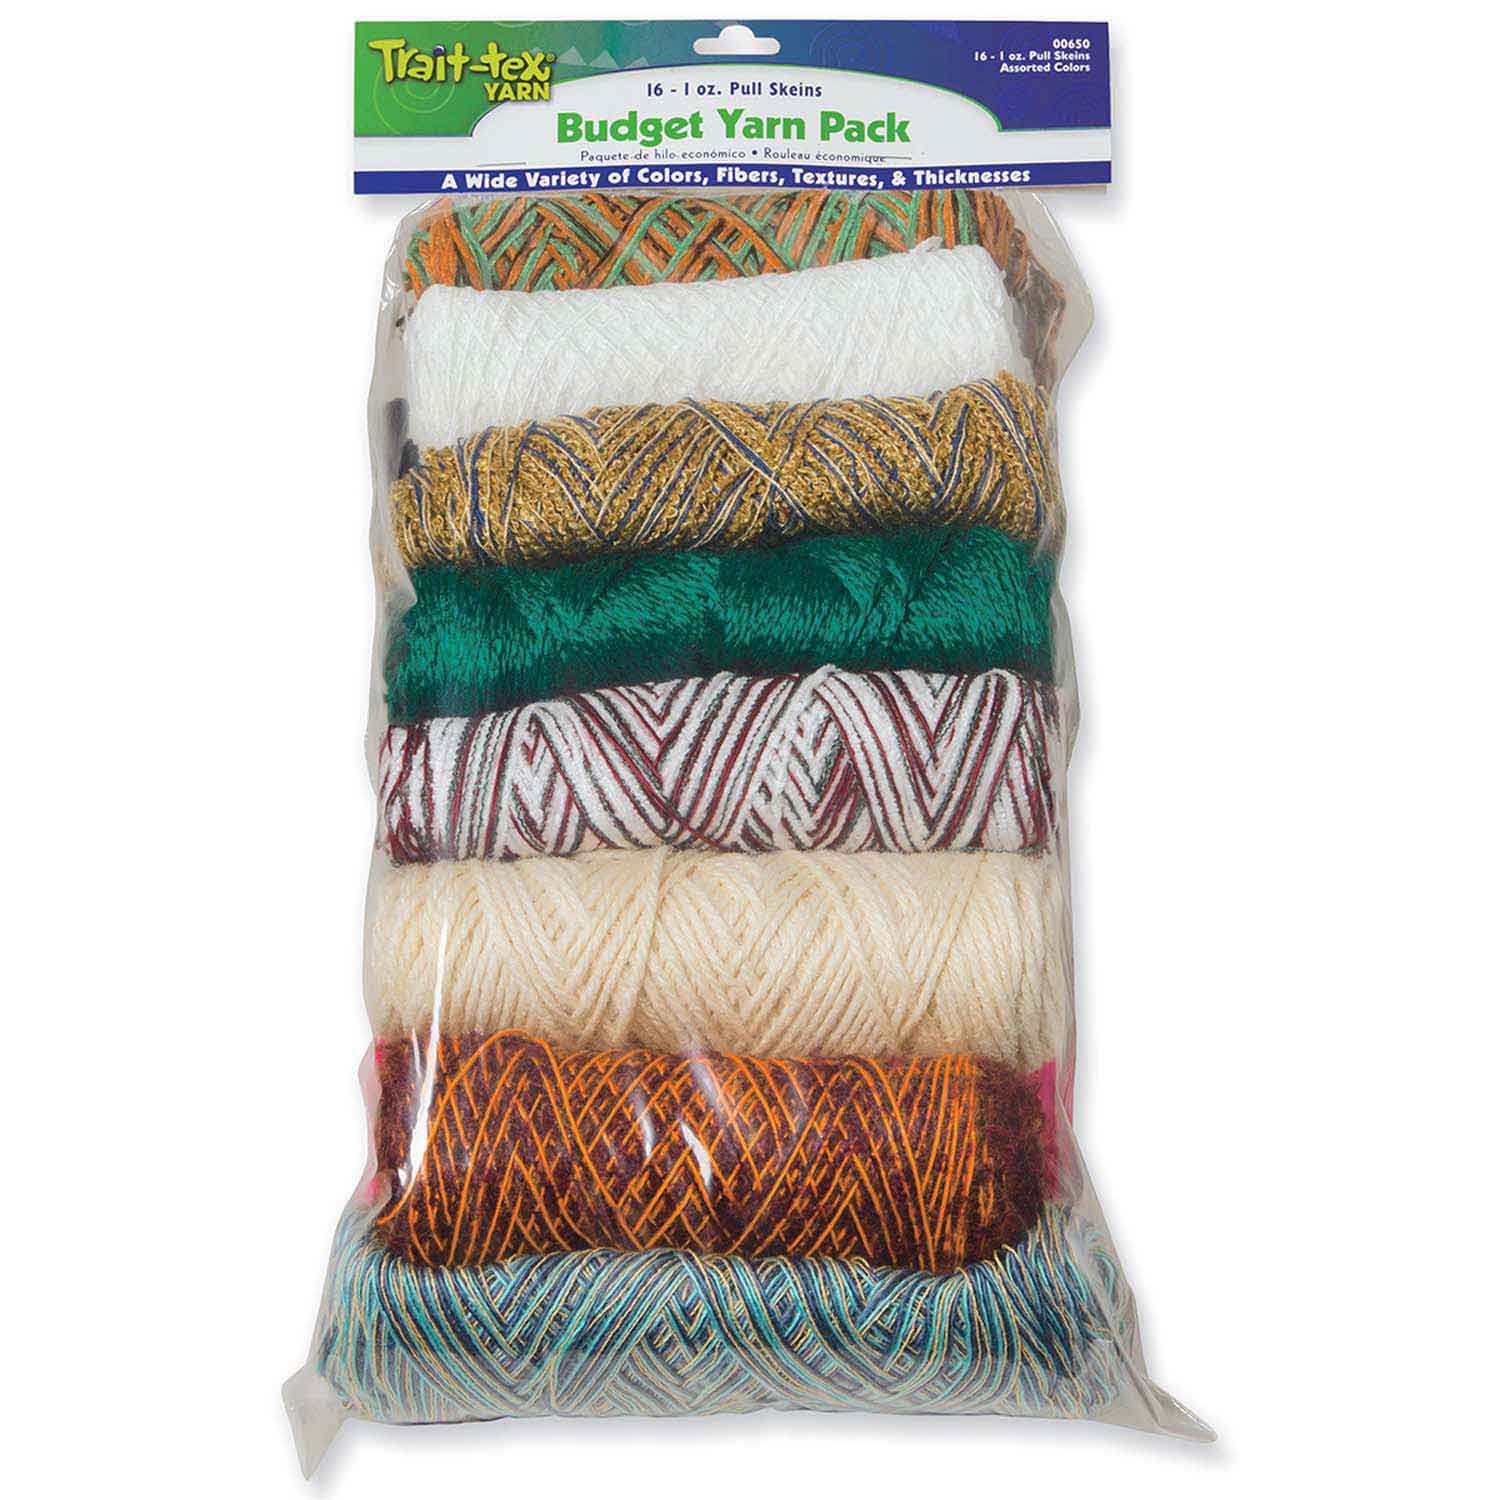 Budget Yarn Pack Assorted Colors